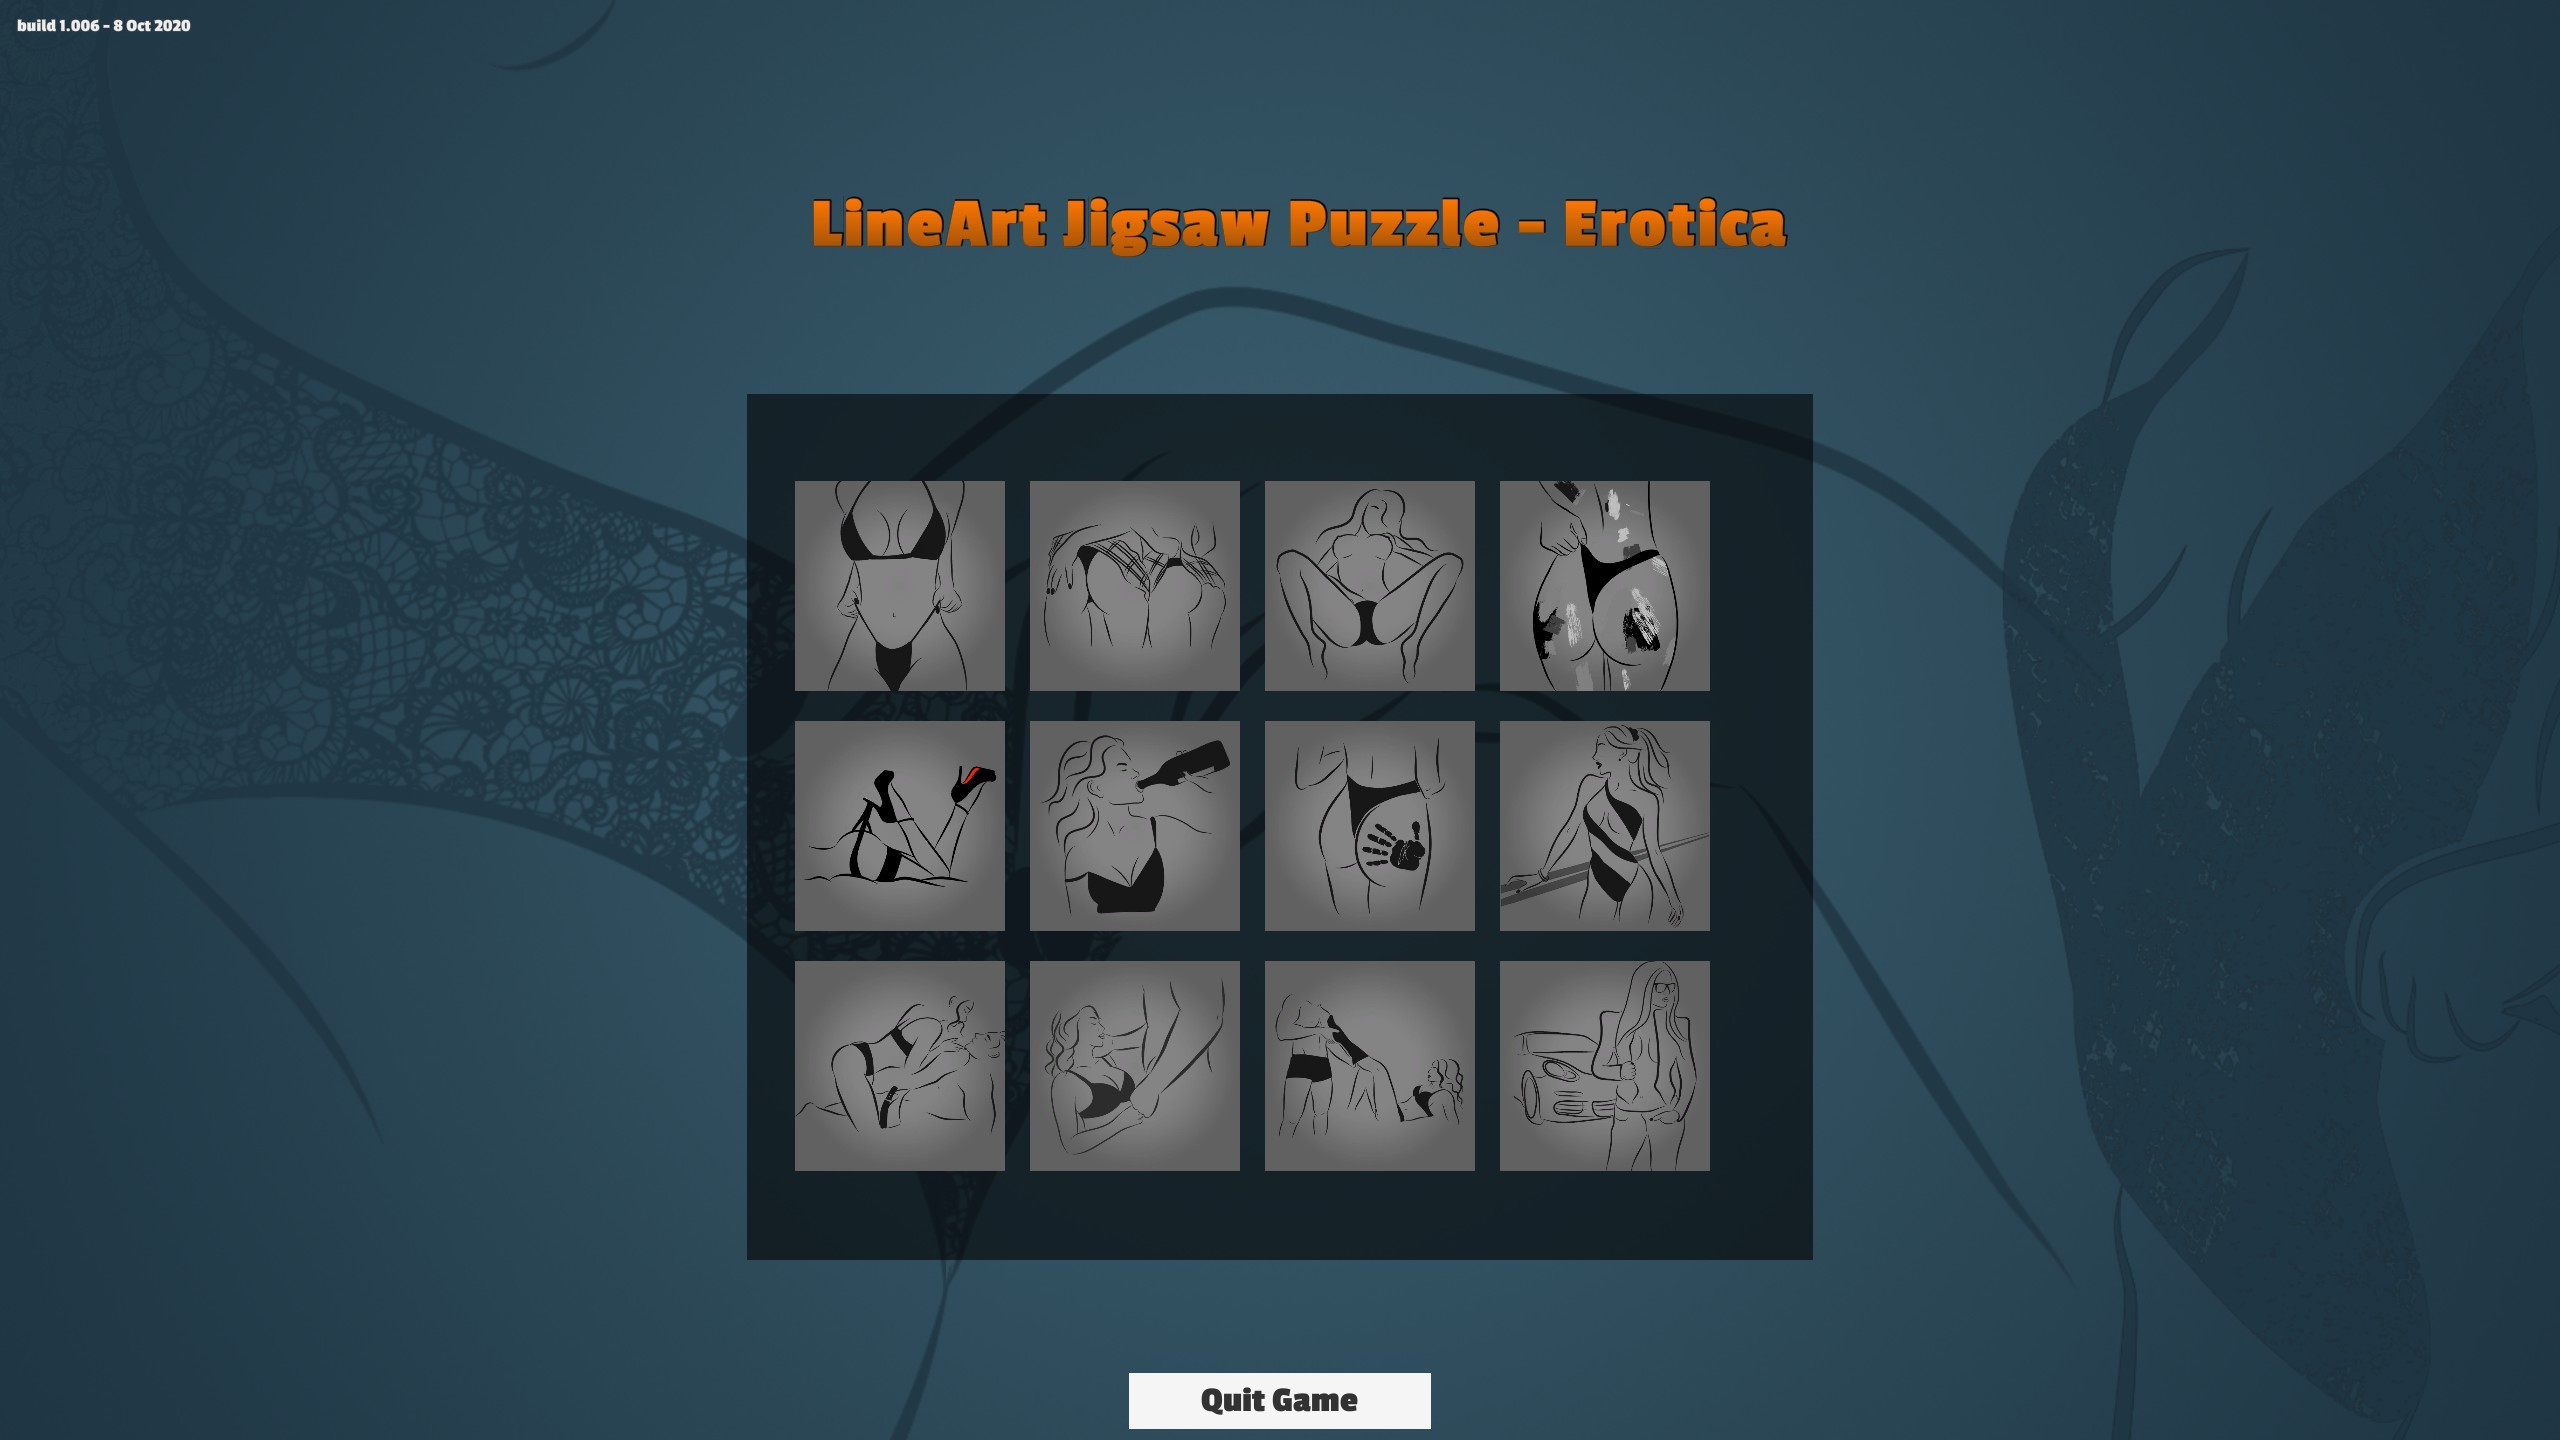 LineArt Jigsaw Puzzle - Erotica Steam CD Key, 0.21$